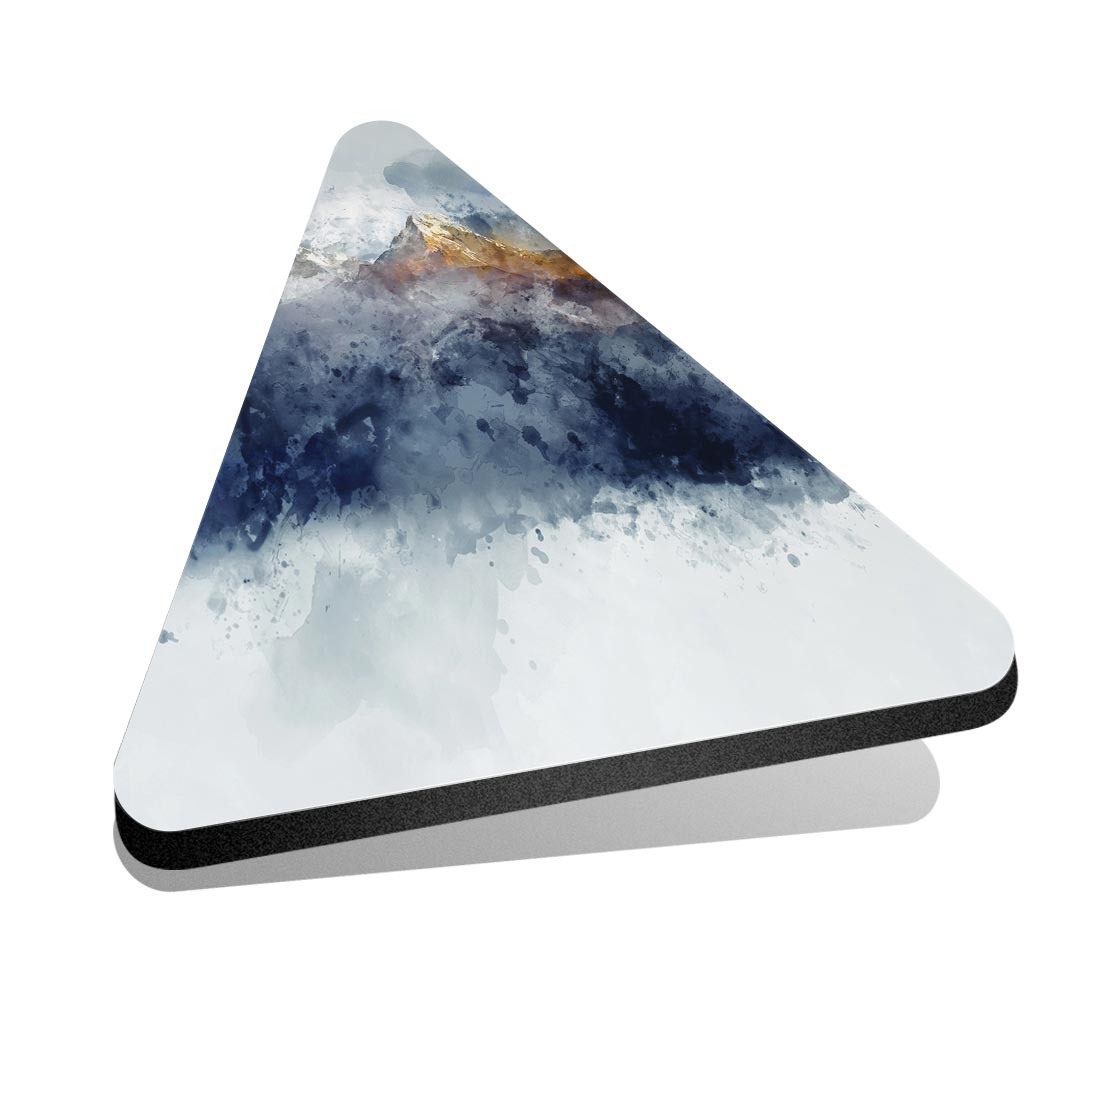 1x Triangle Fridge MDF Magnet Abstract Art Watercolour Mountains #52570 - Picture 1 of 1